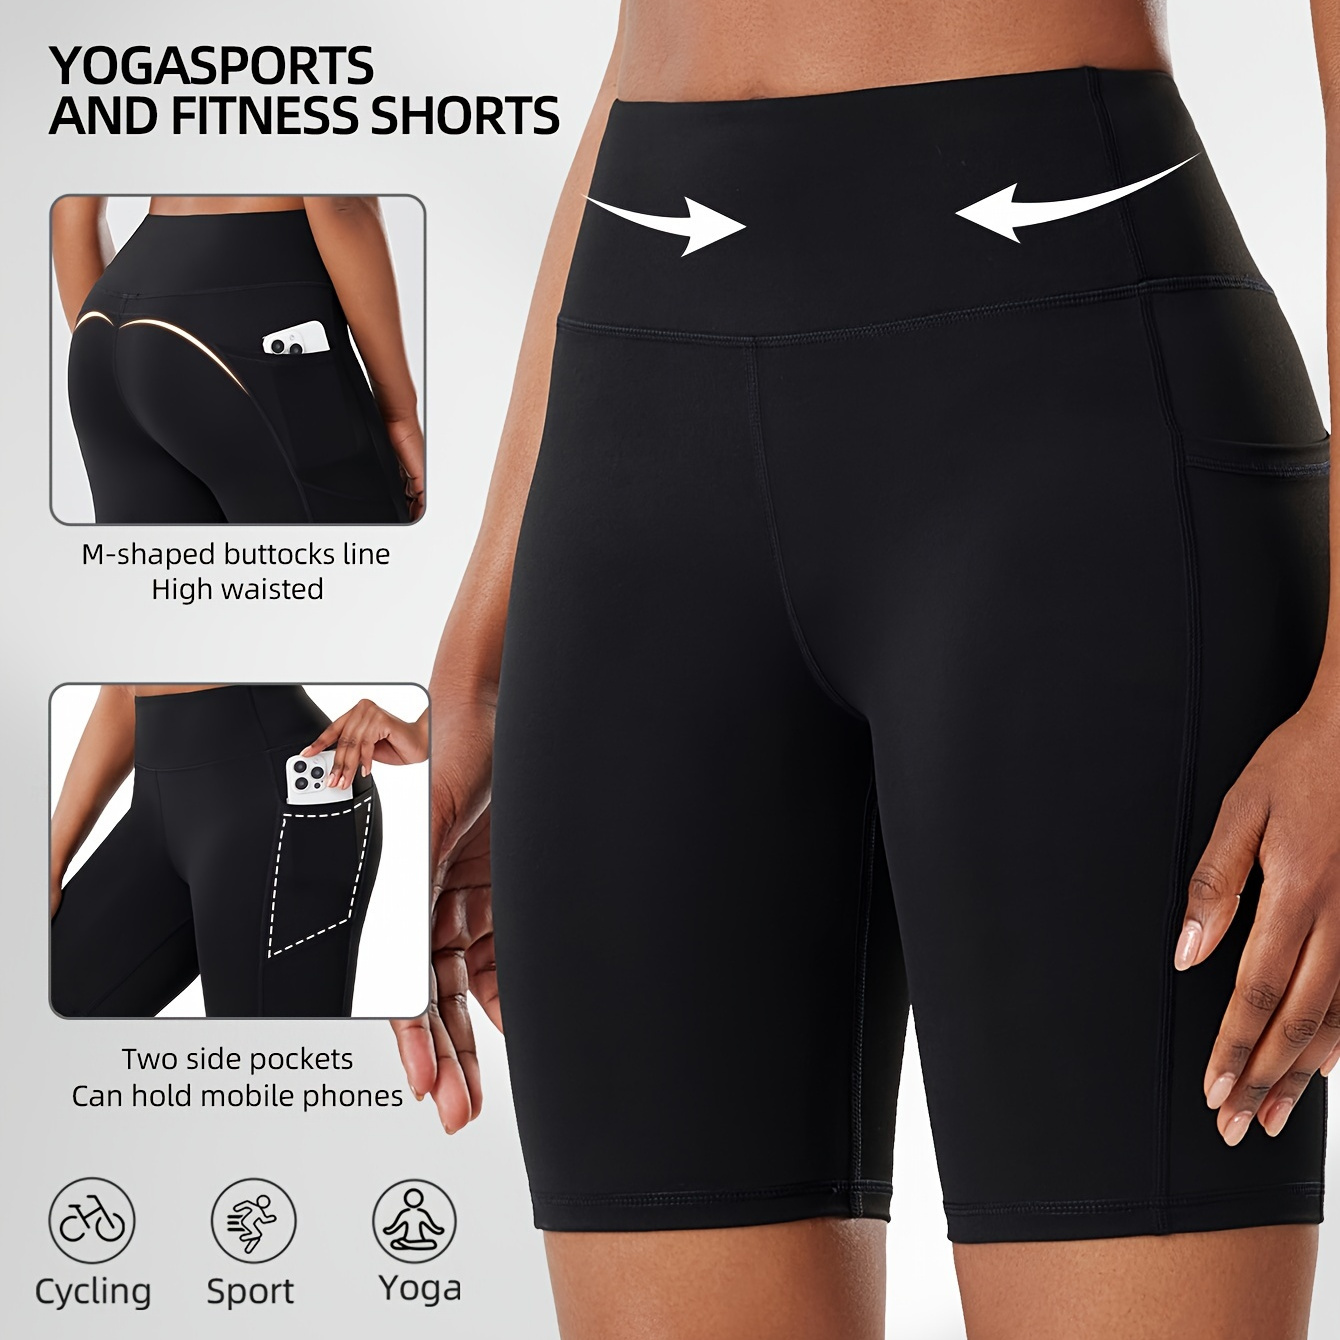 

Women's High Waist Fitness Yoga Shorts With Dual Side Pockets, Tummy Control, Butt Lifting, Quick-dry, Stretchable Fabric For Cycling, Running, Sports, Outdoor Capri-length Leggings